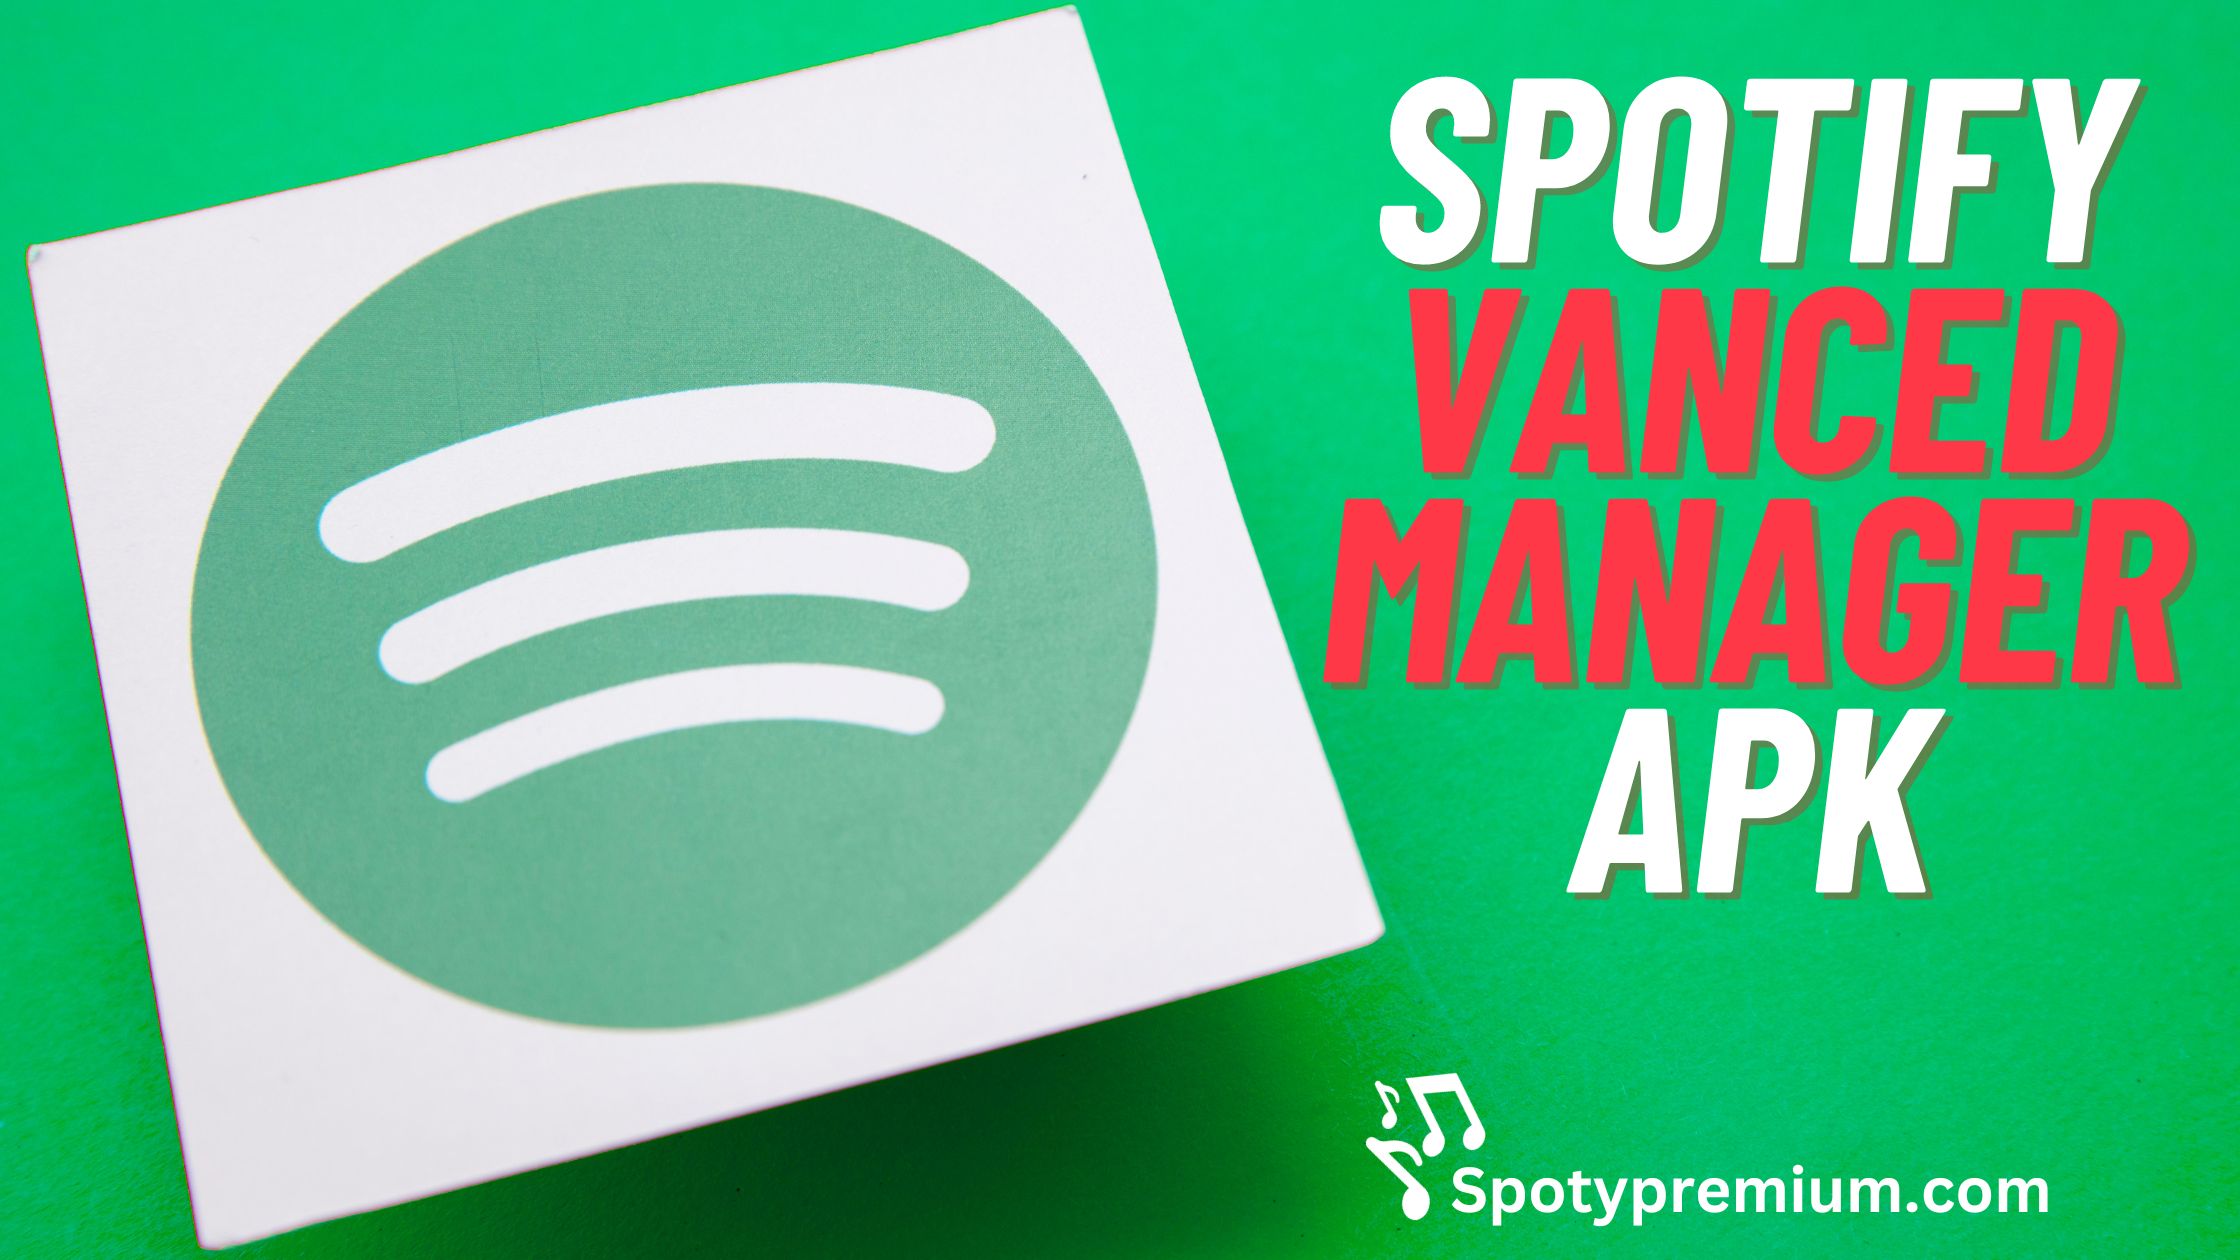 Spotify-Vanced-manager-Apk